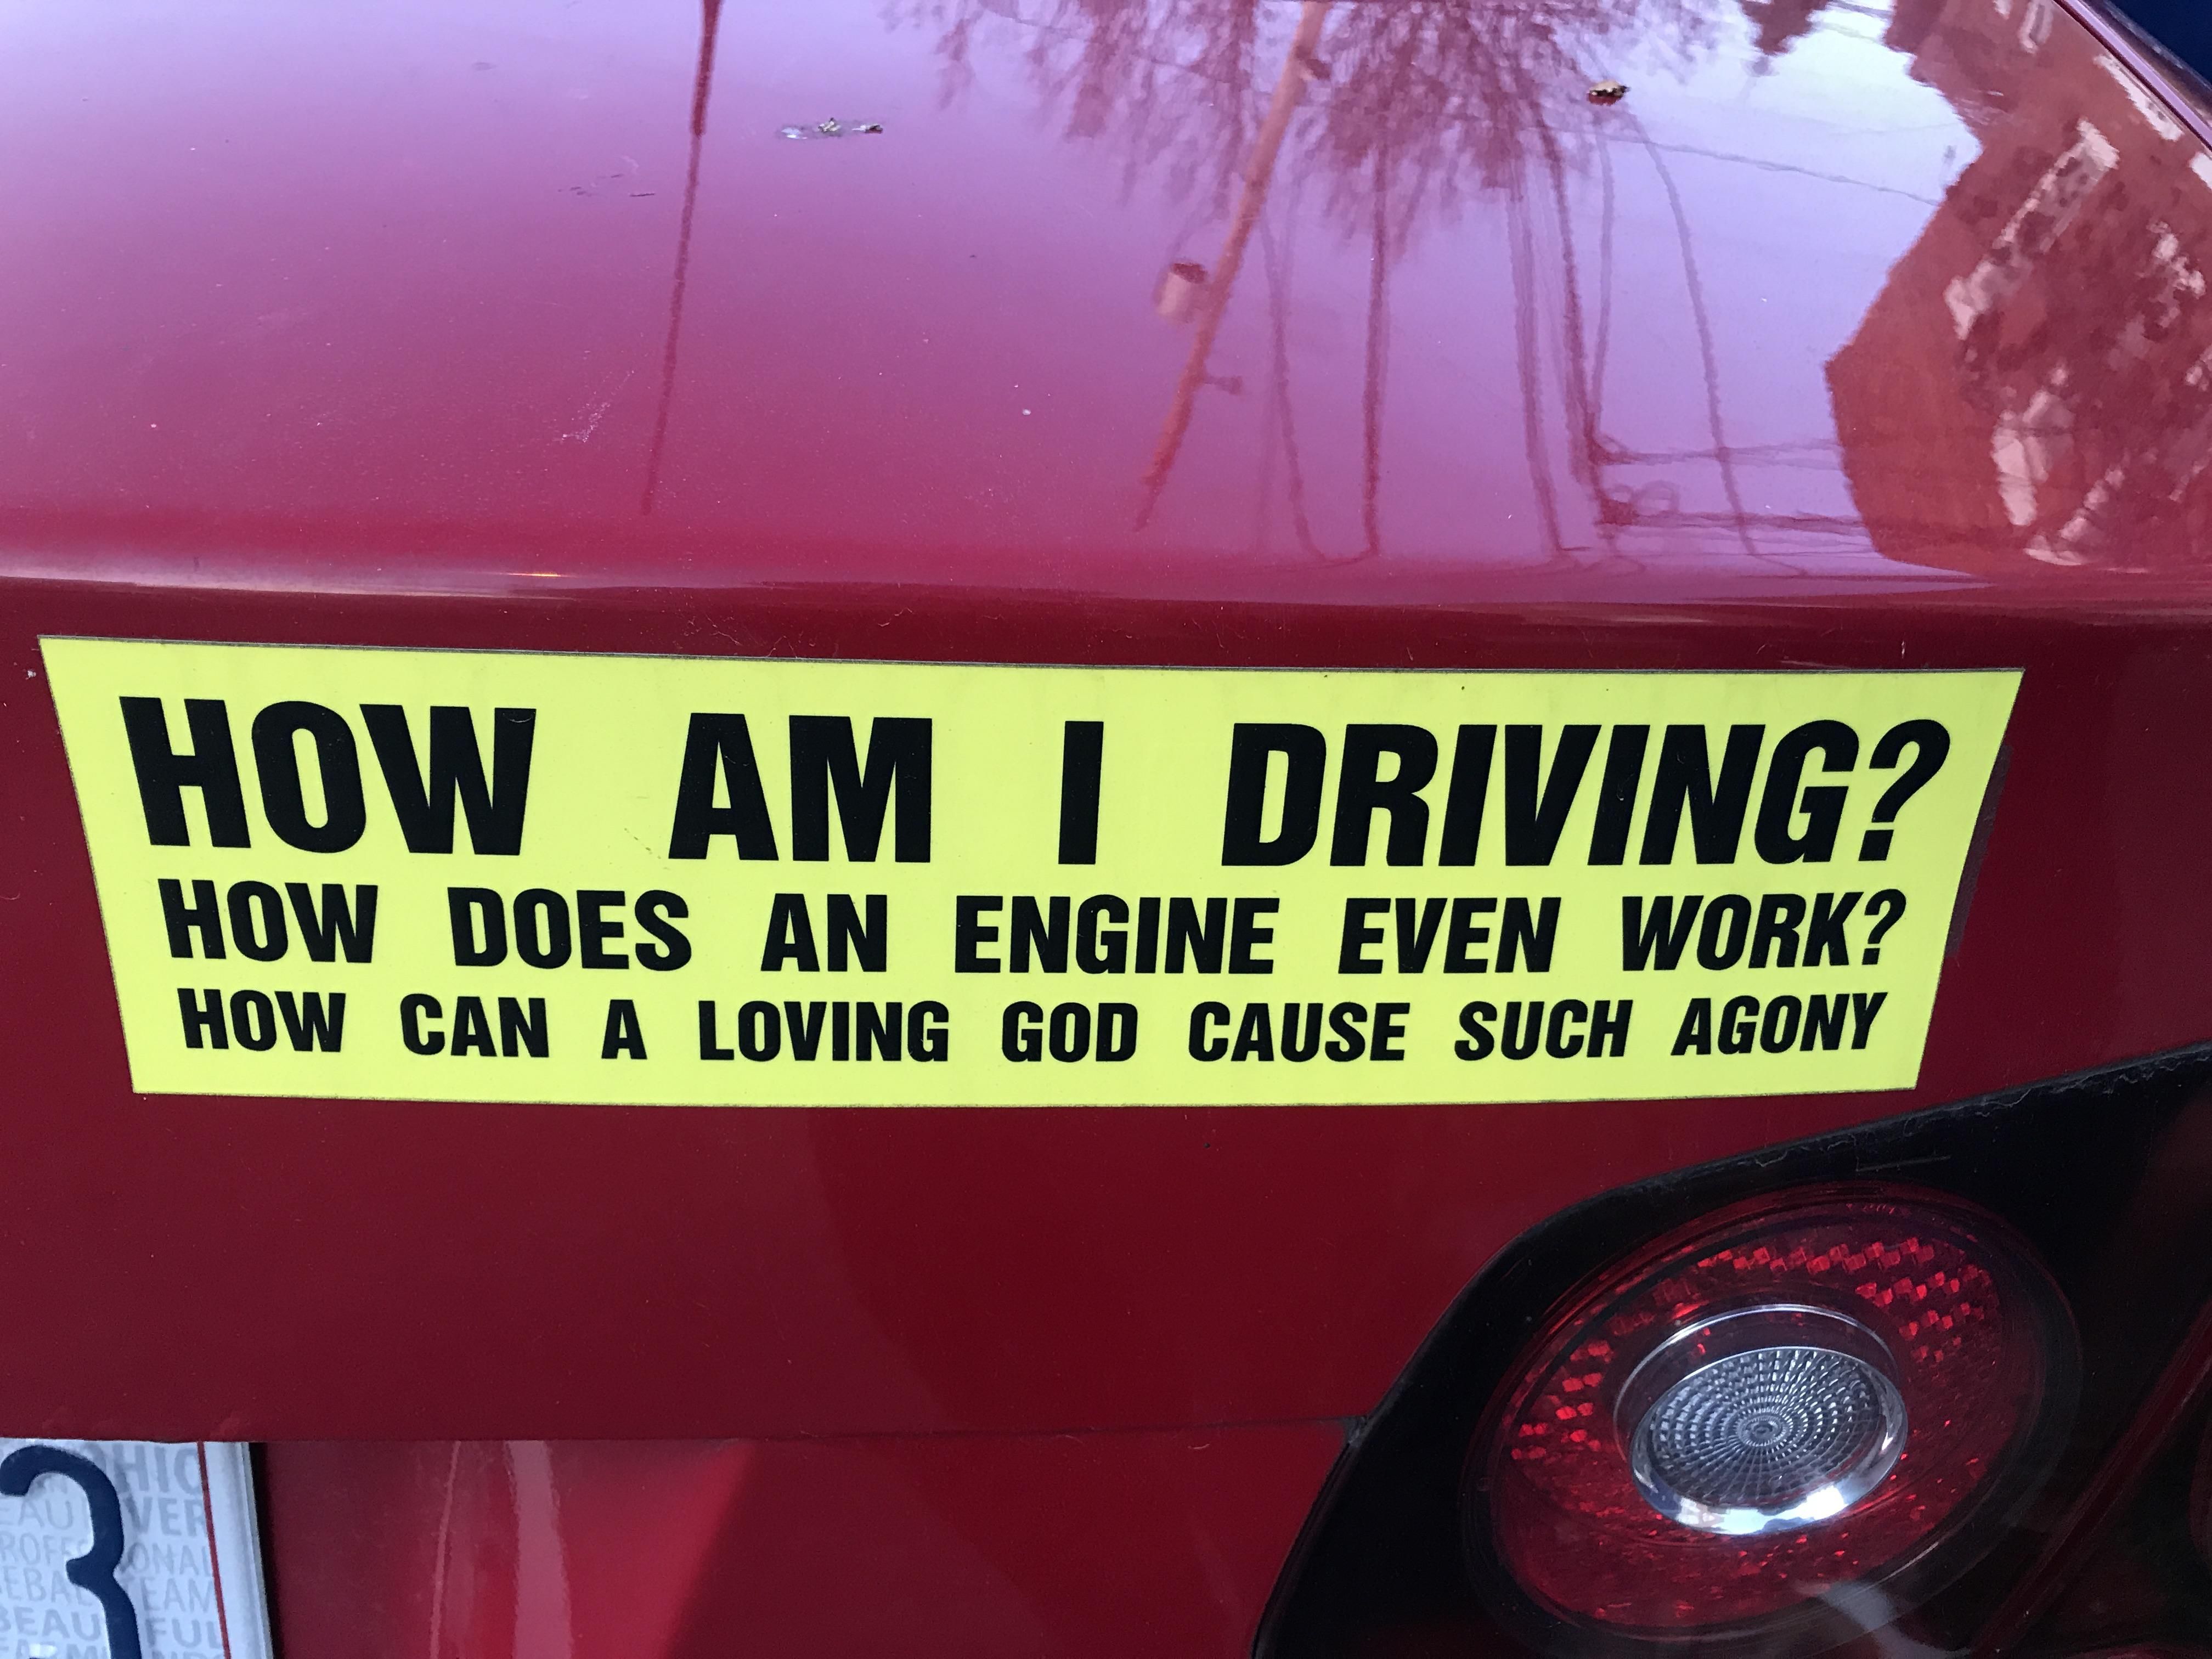 When did bumper stickers get so existential?